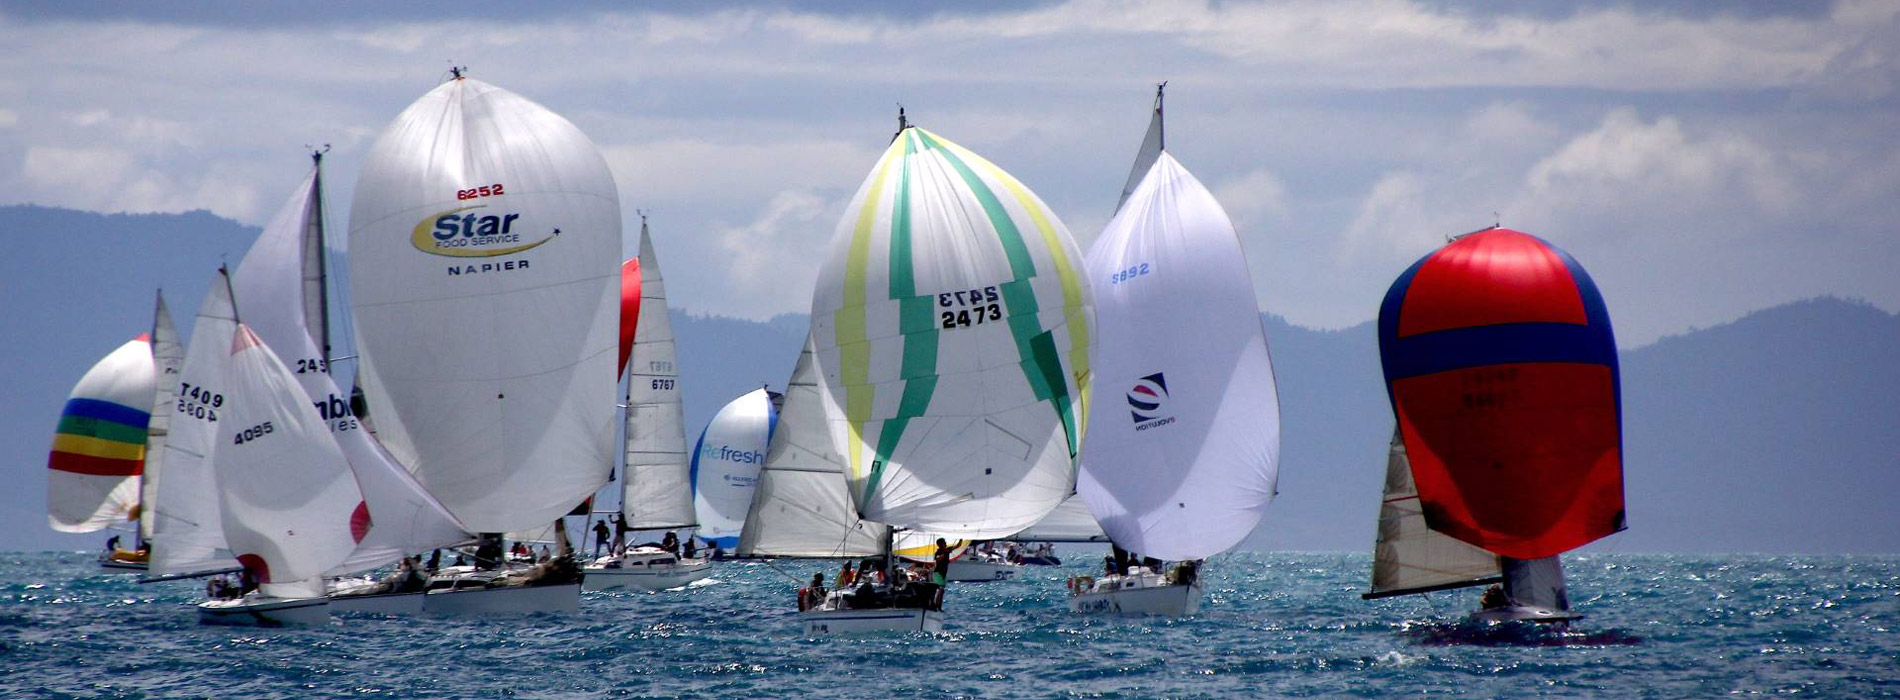 Yachts from the Tasman Bay Cruising Club with spinnakers up! 